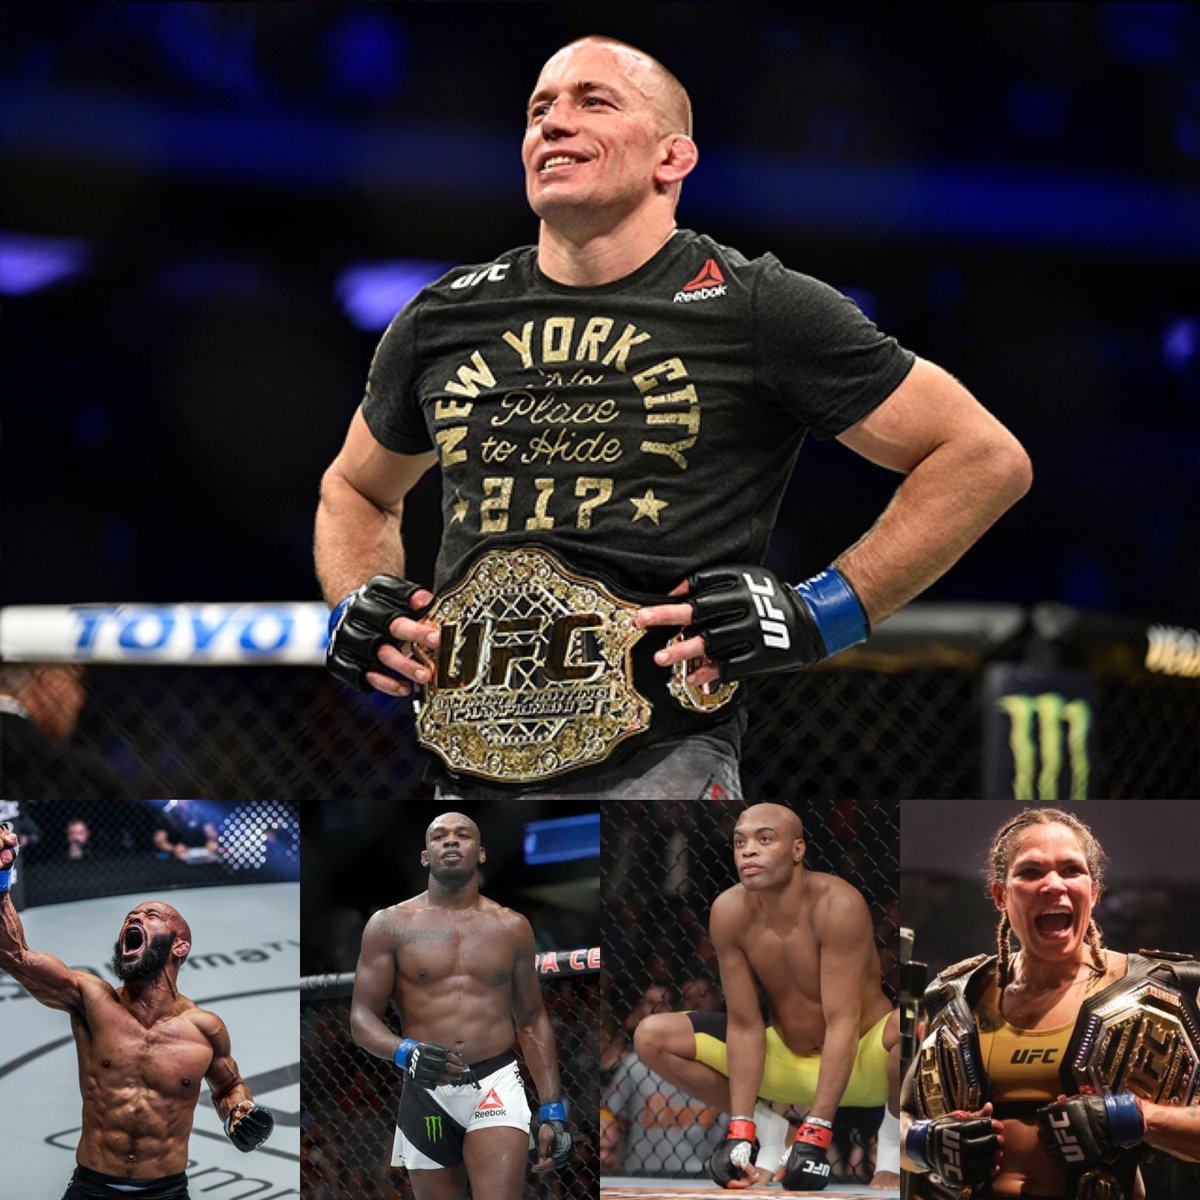 Greatest Of All Time

1.GSP
2.Mighty Mouse
3.Jon Jones
4.Anderson Silva 
5.Amanda Nunes 

The most Dominant fighters I’ve had the privilege to watch #MMA https://t.co/xQu21JEffs